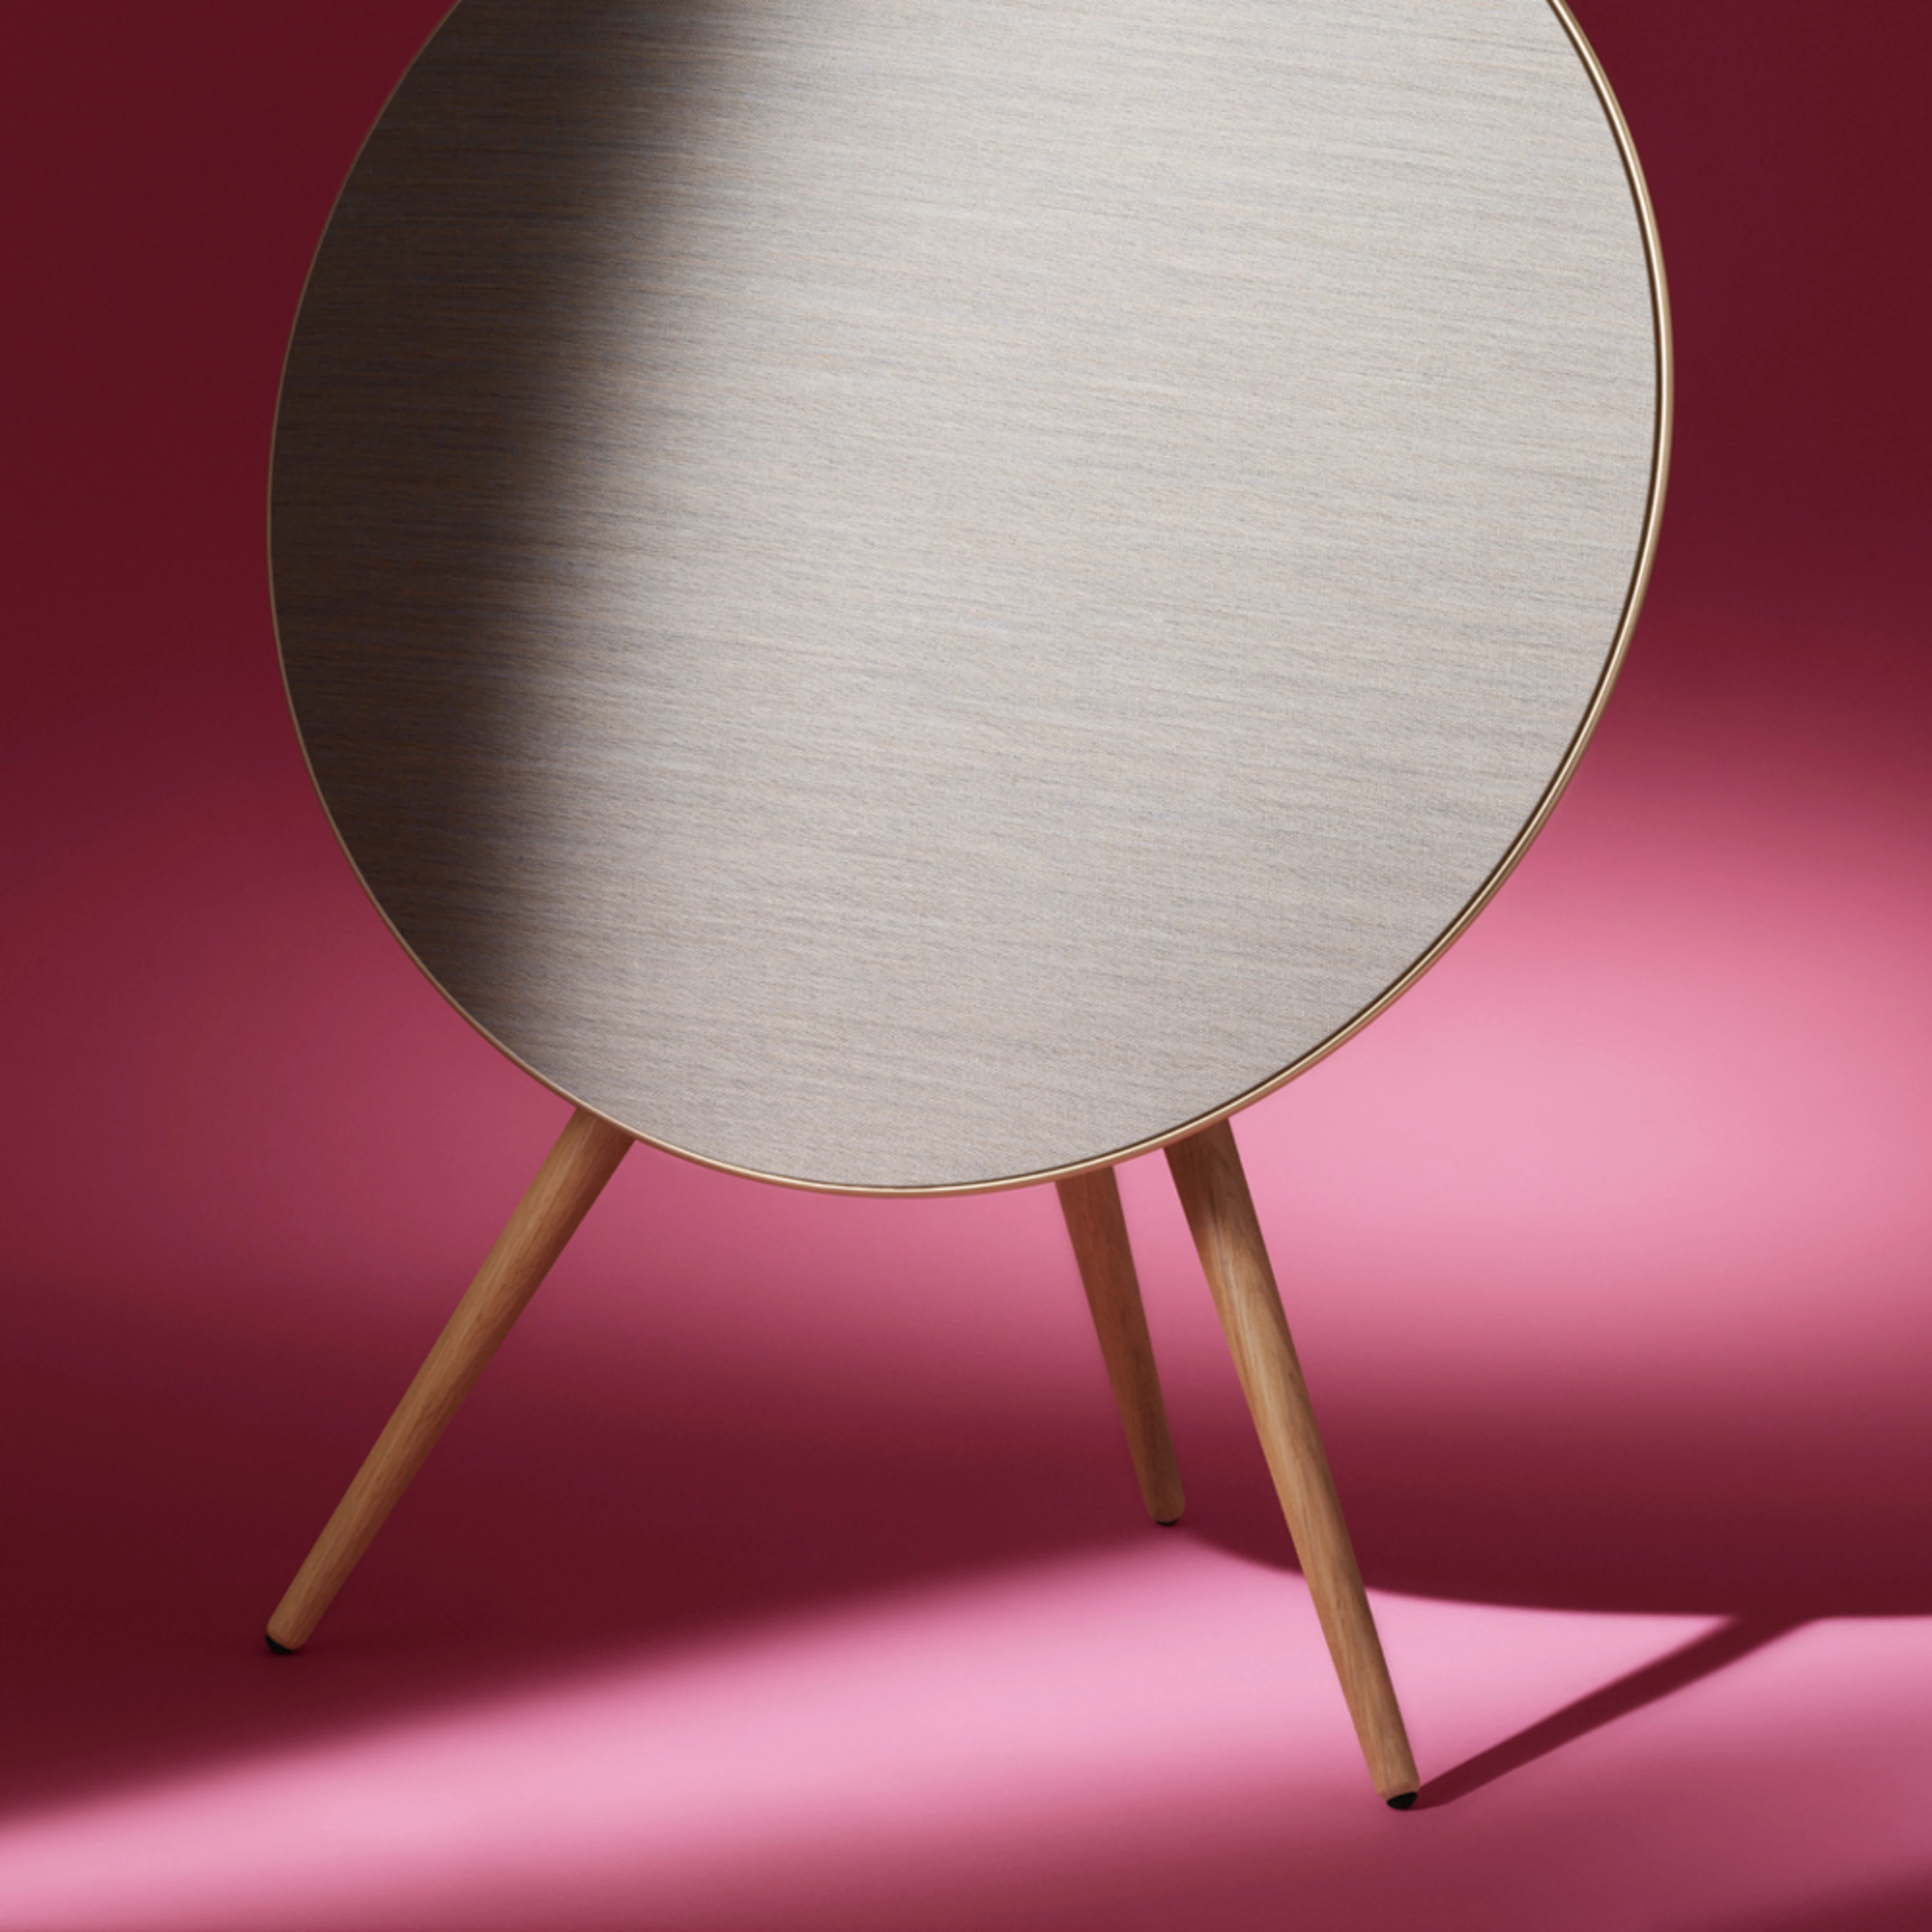 Beoplay A9 home audio speaker